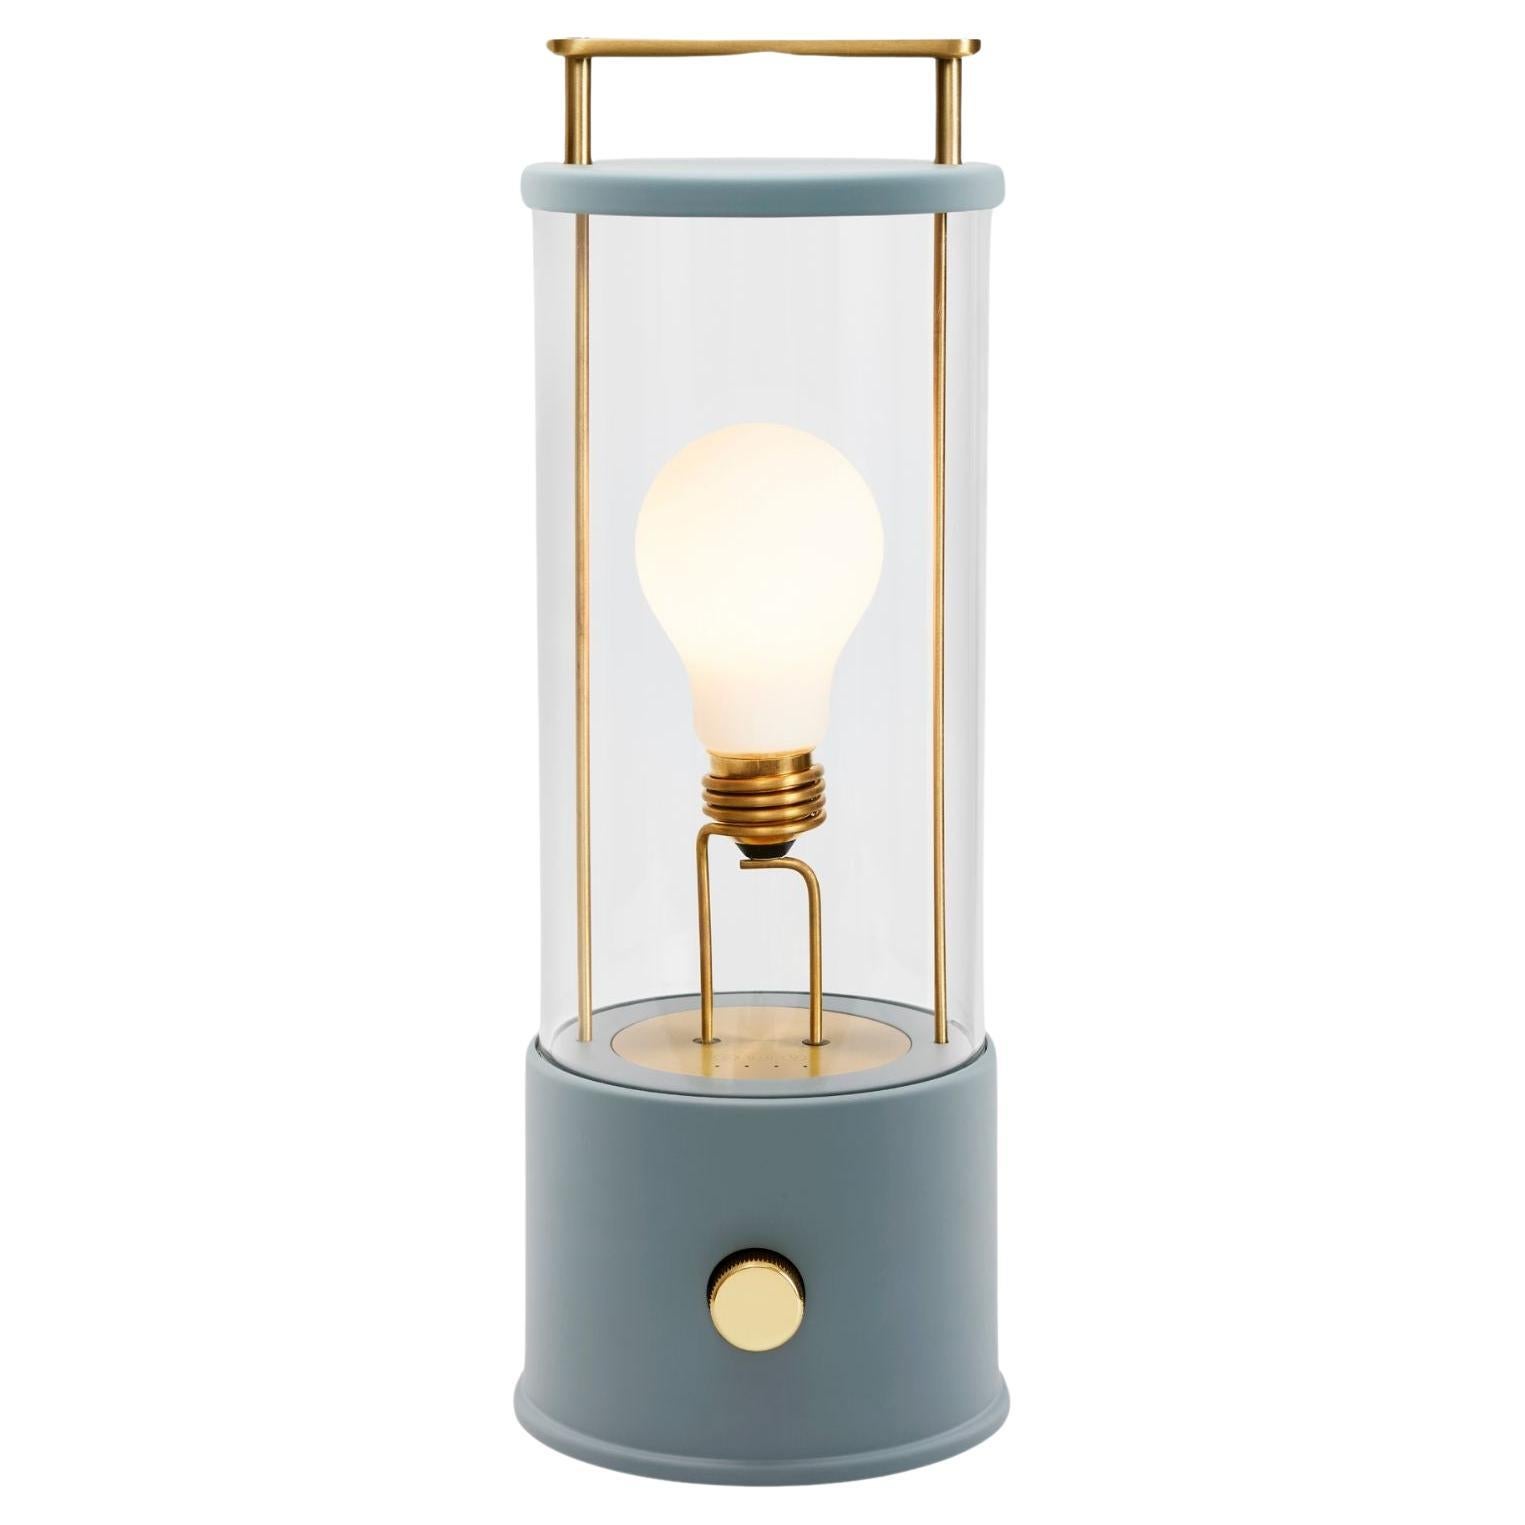 'The Muse' Portable Lamp in Selvedge Blue by Farrow & Ball for Tala For Sale